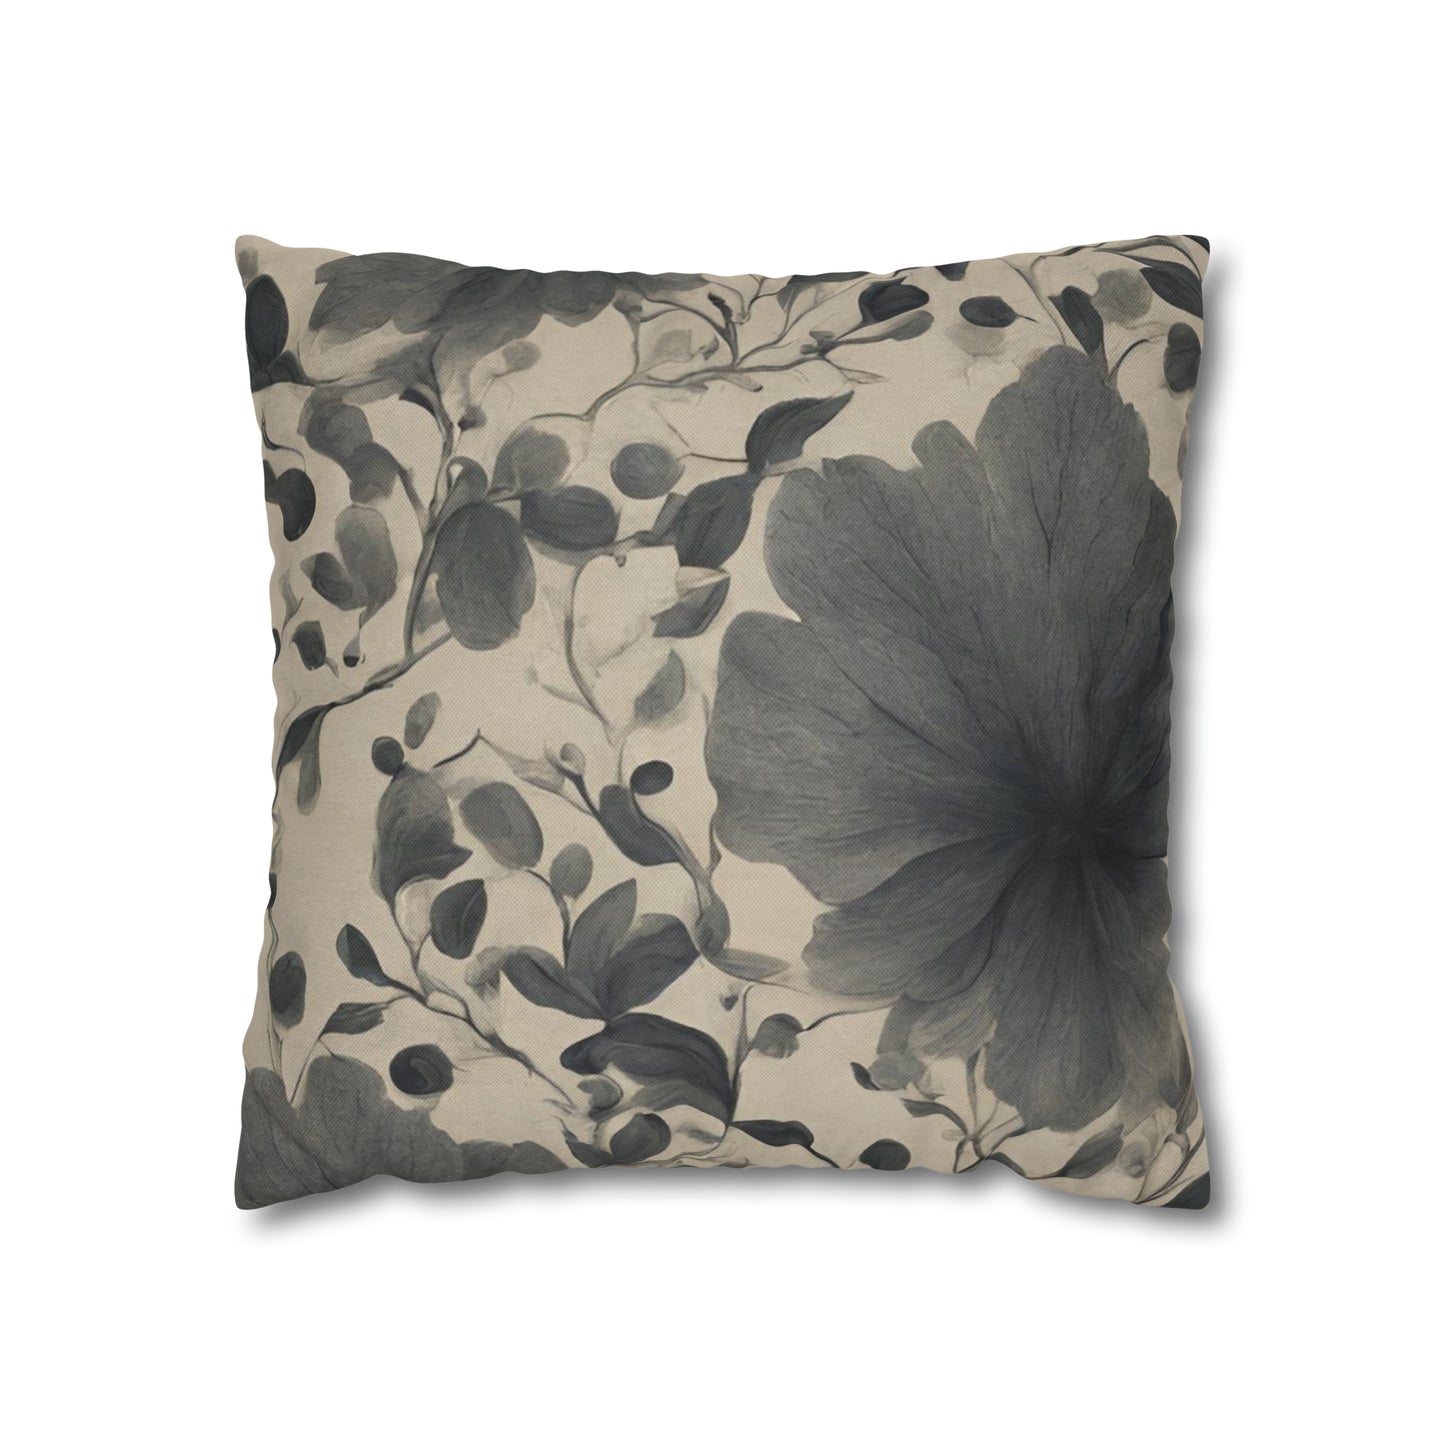 Beige And Black Floral Throw Pillow Cover